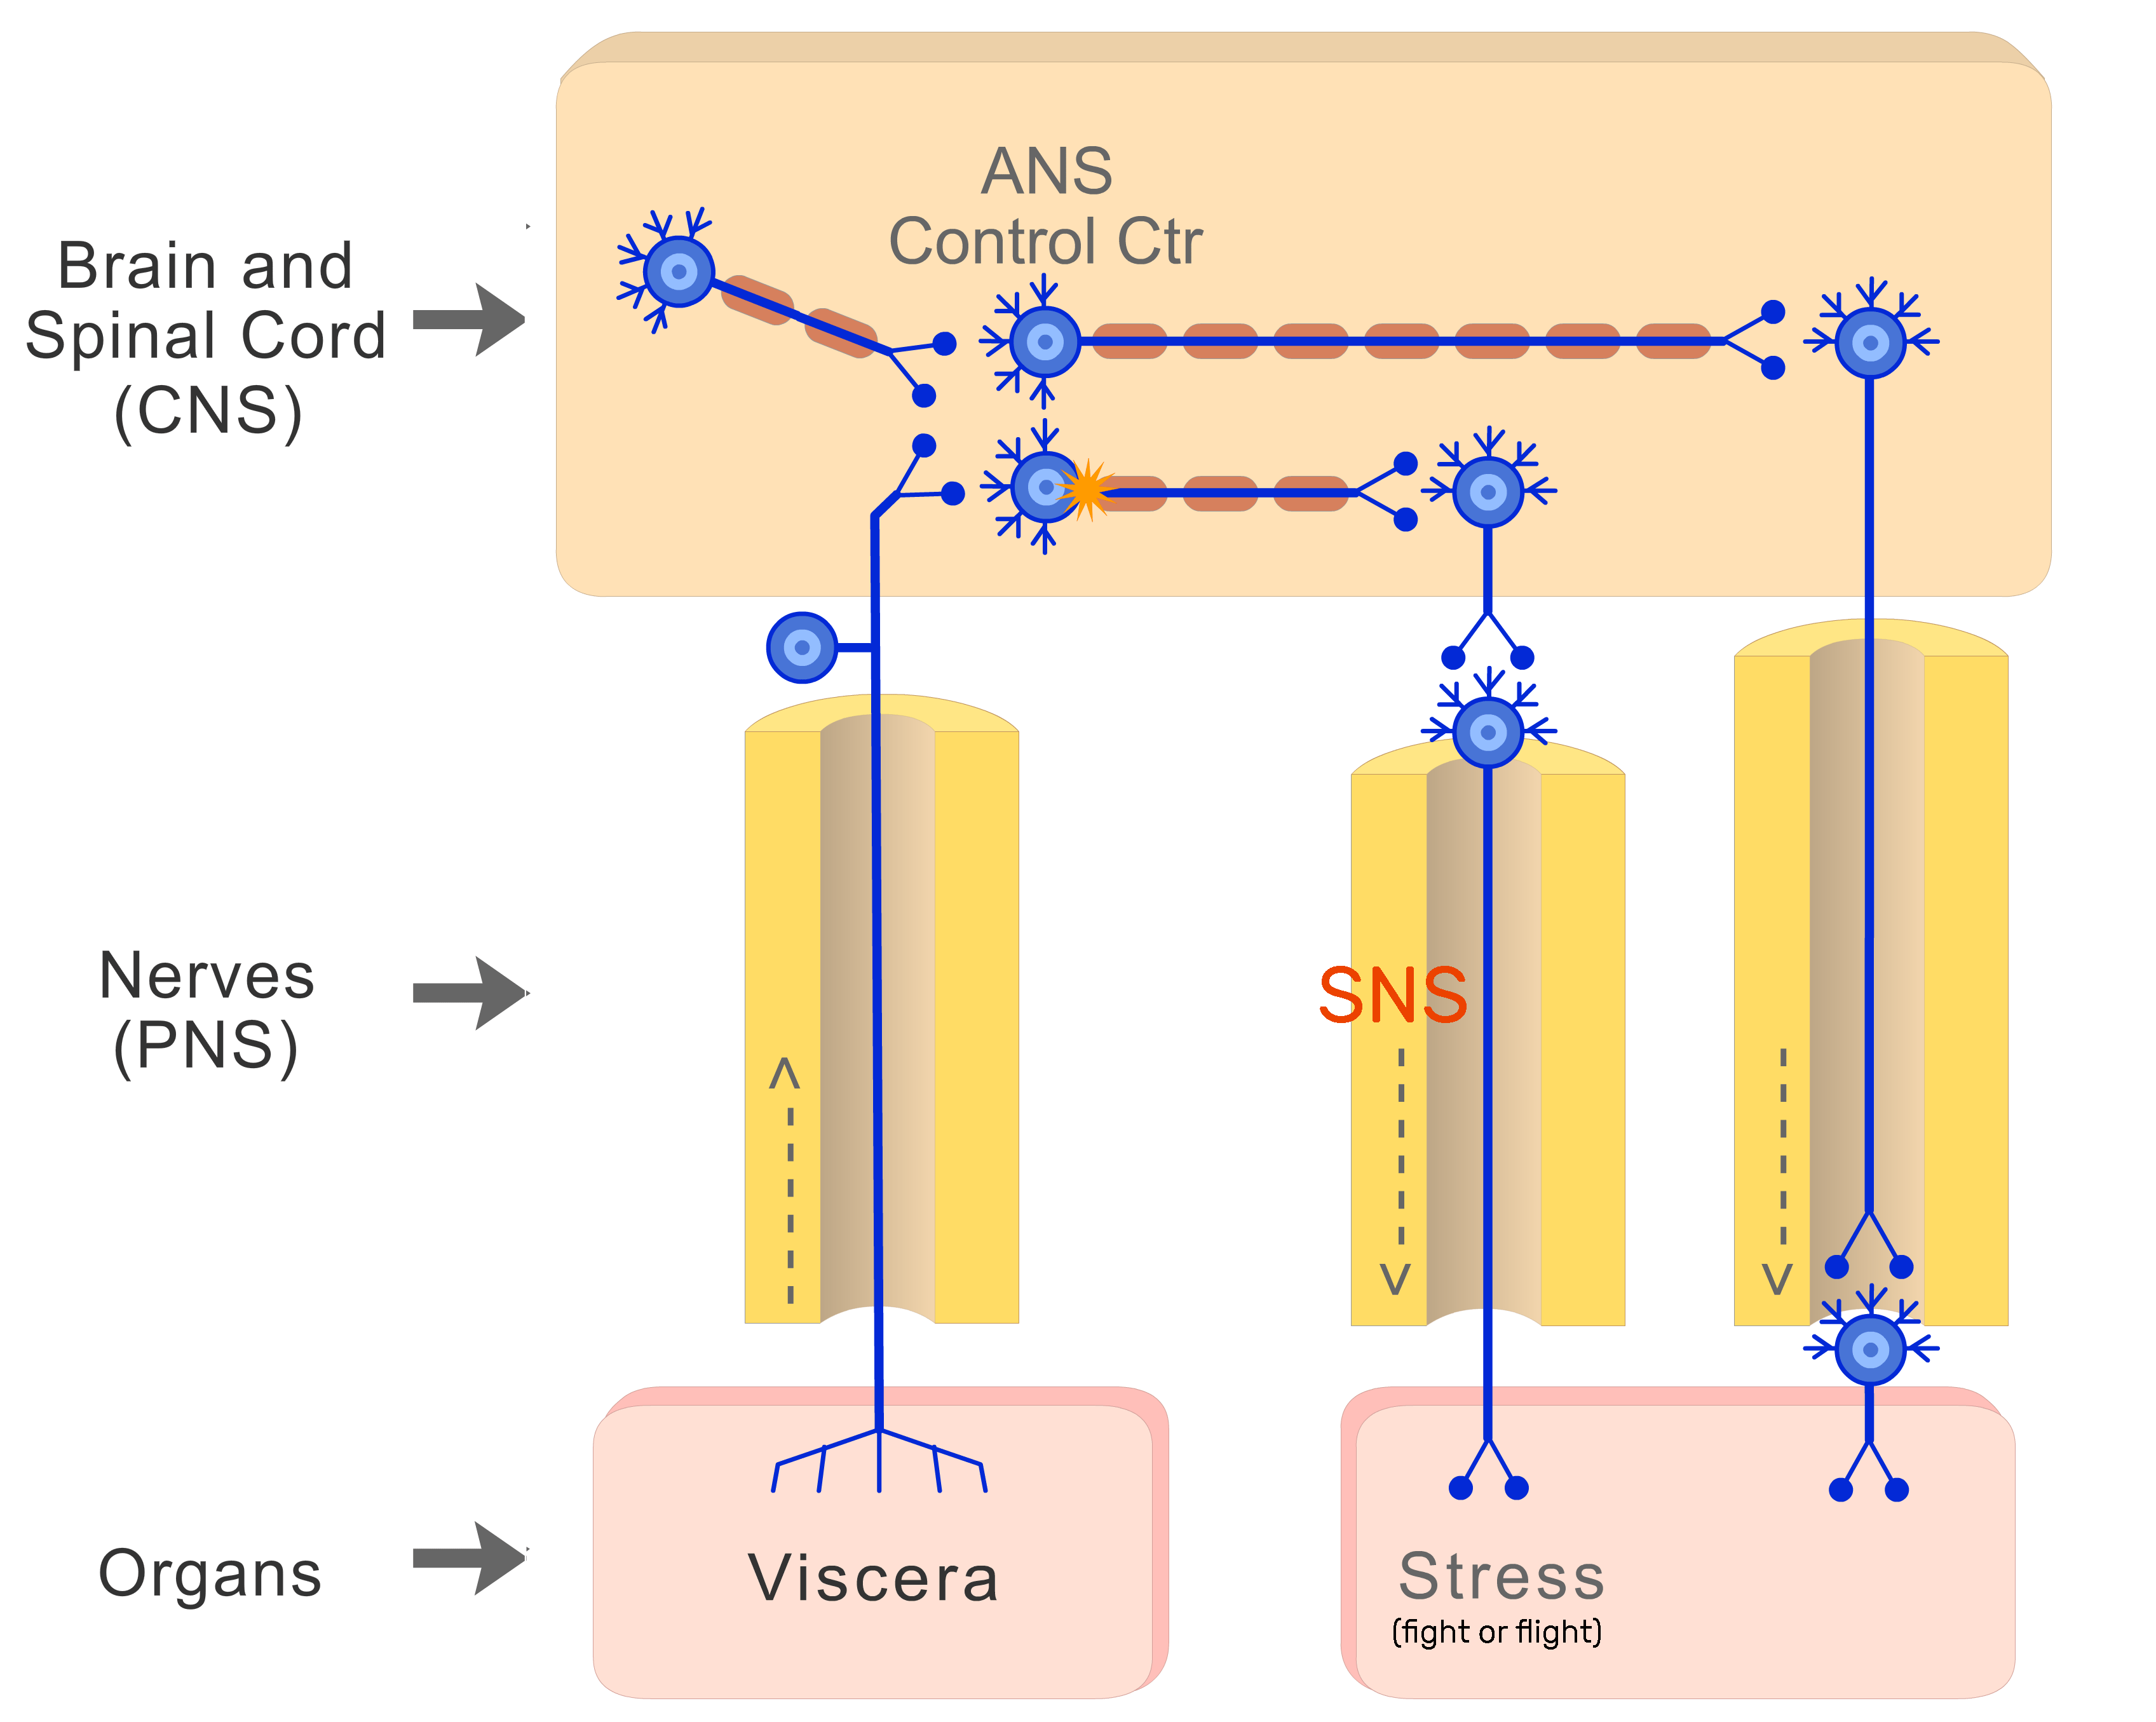 An image showing the action potential moves through SNS (sympathetic nervous system) neuron from the CNS to reach viscera (Feed or breed)